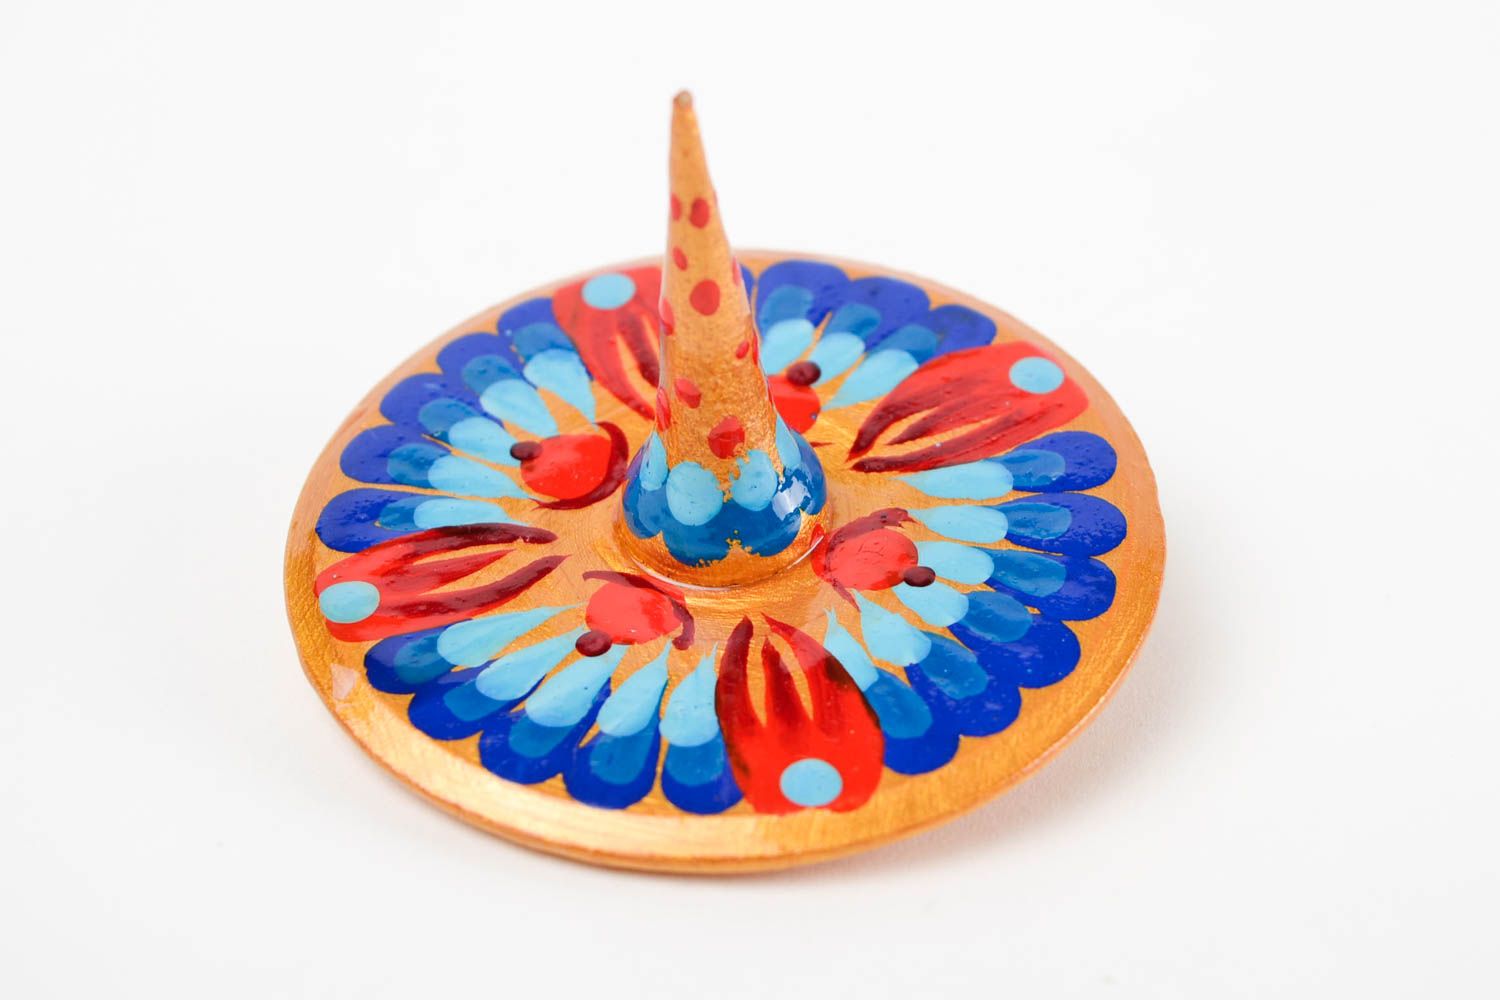 Beautiful handmade wooden spinning top smart toy spin top birthday gift ideas photo 4